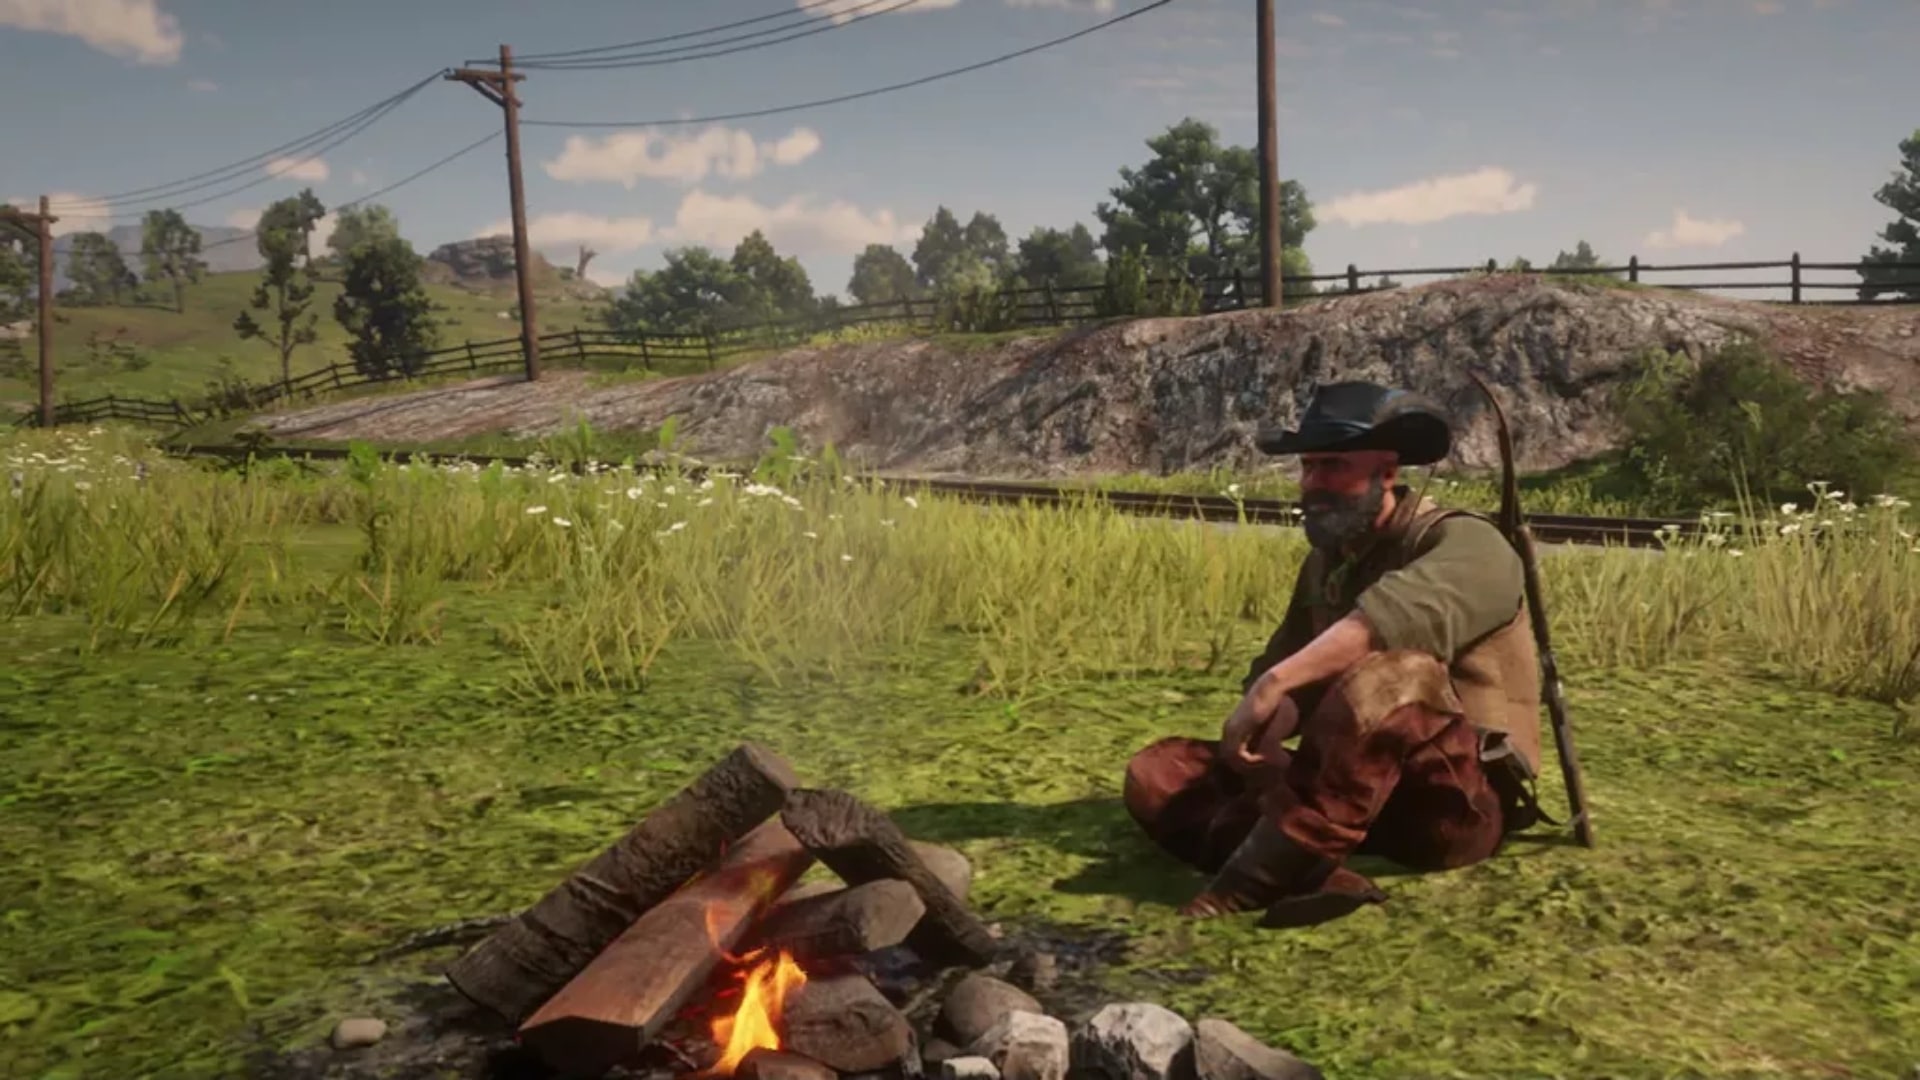 red-dead-online-is-dead-and-its-funeral-is-next-week-fans-say-GamersRD